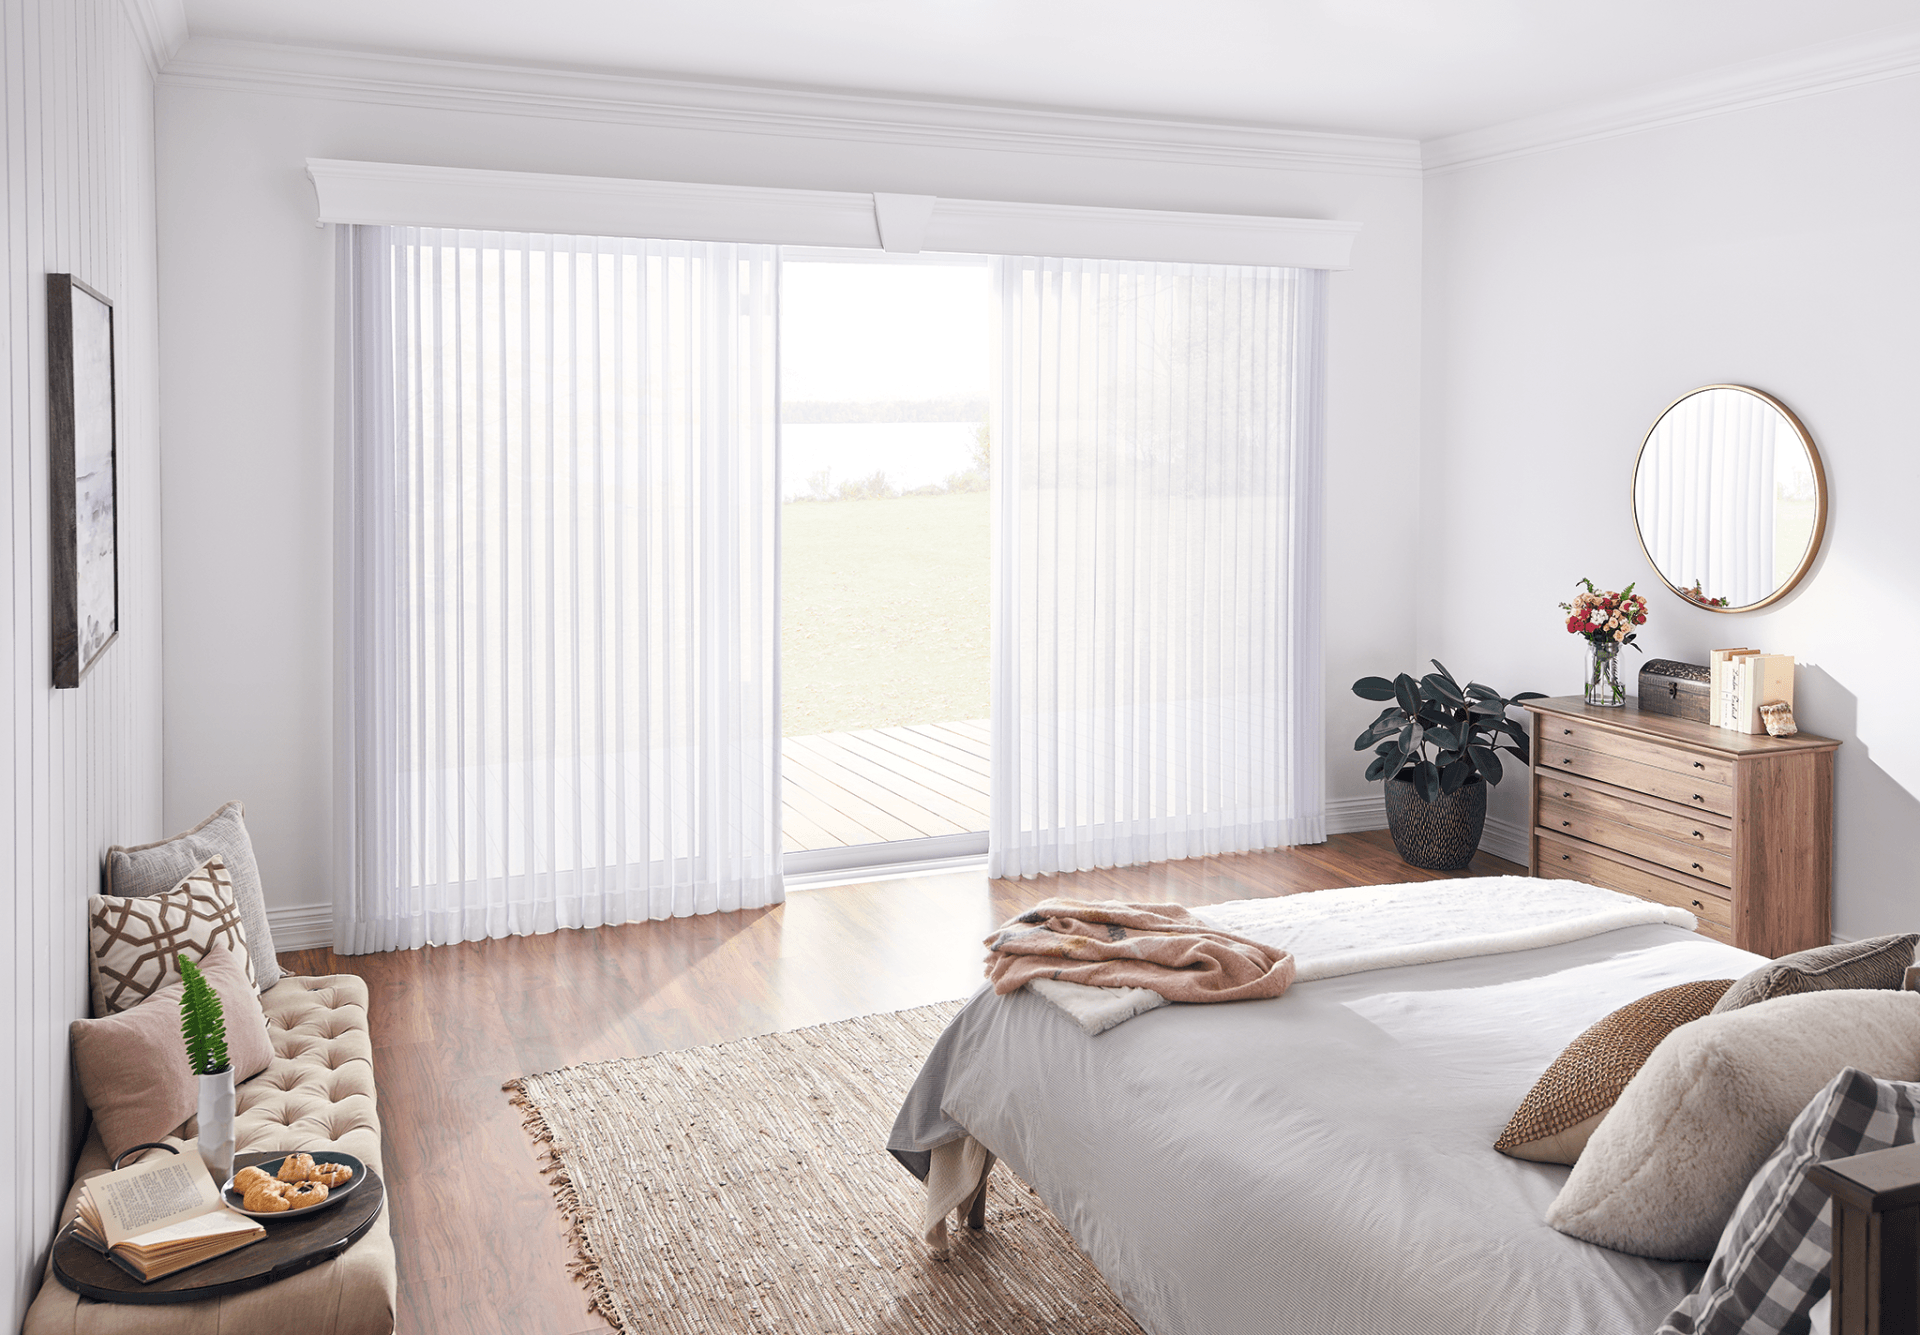 Norman® SmartDrape™ Shades and alternatives to vertical blinds for sliding glass doors near Sonoma, California (CA)